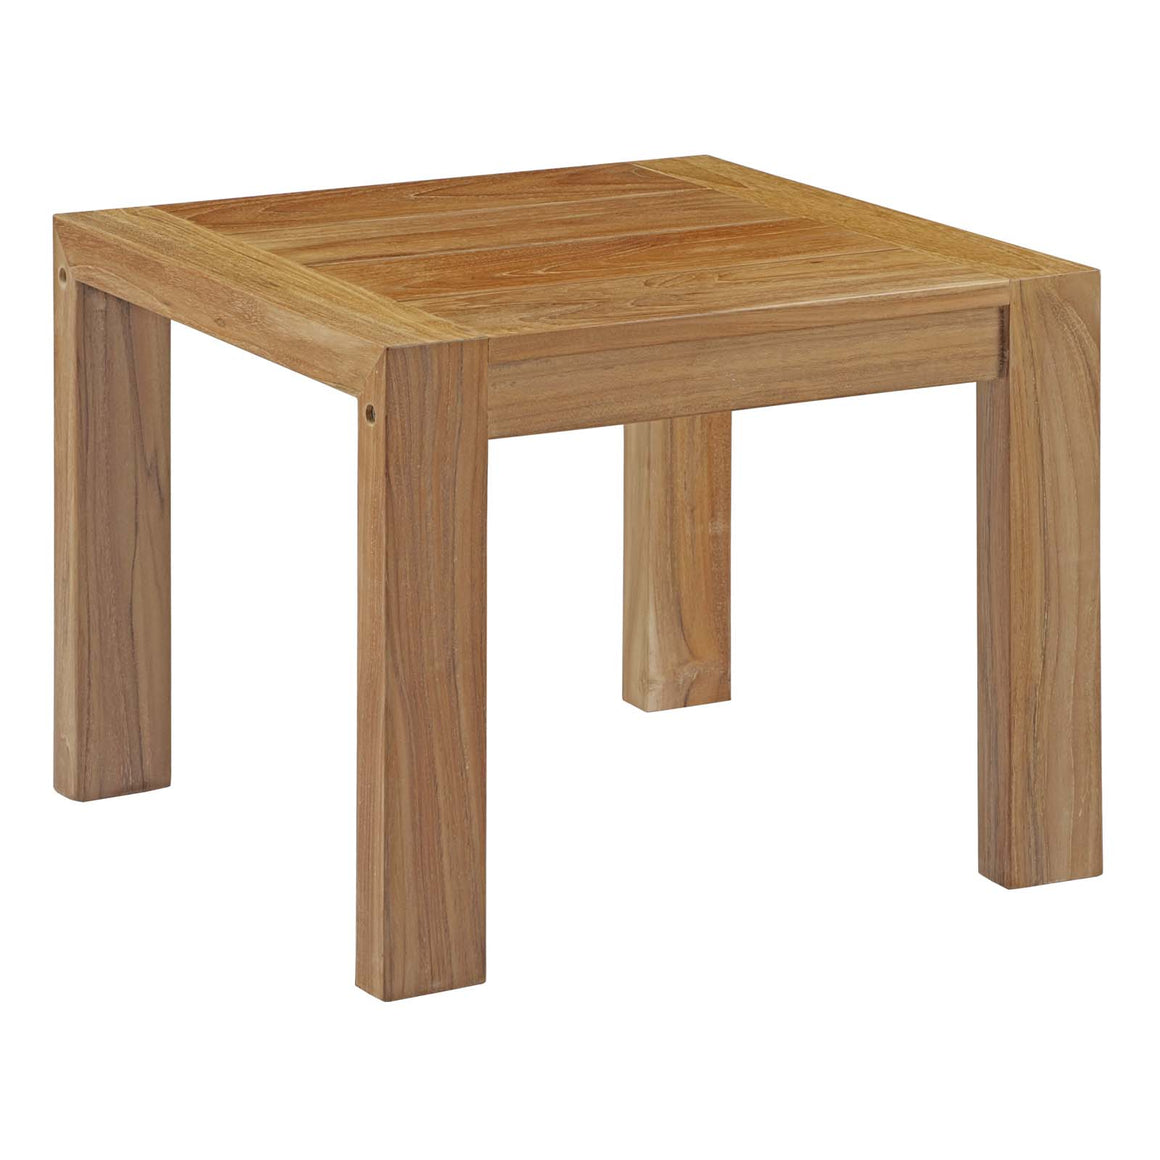 Upland Outdoor Patio Wood Side Table